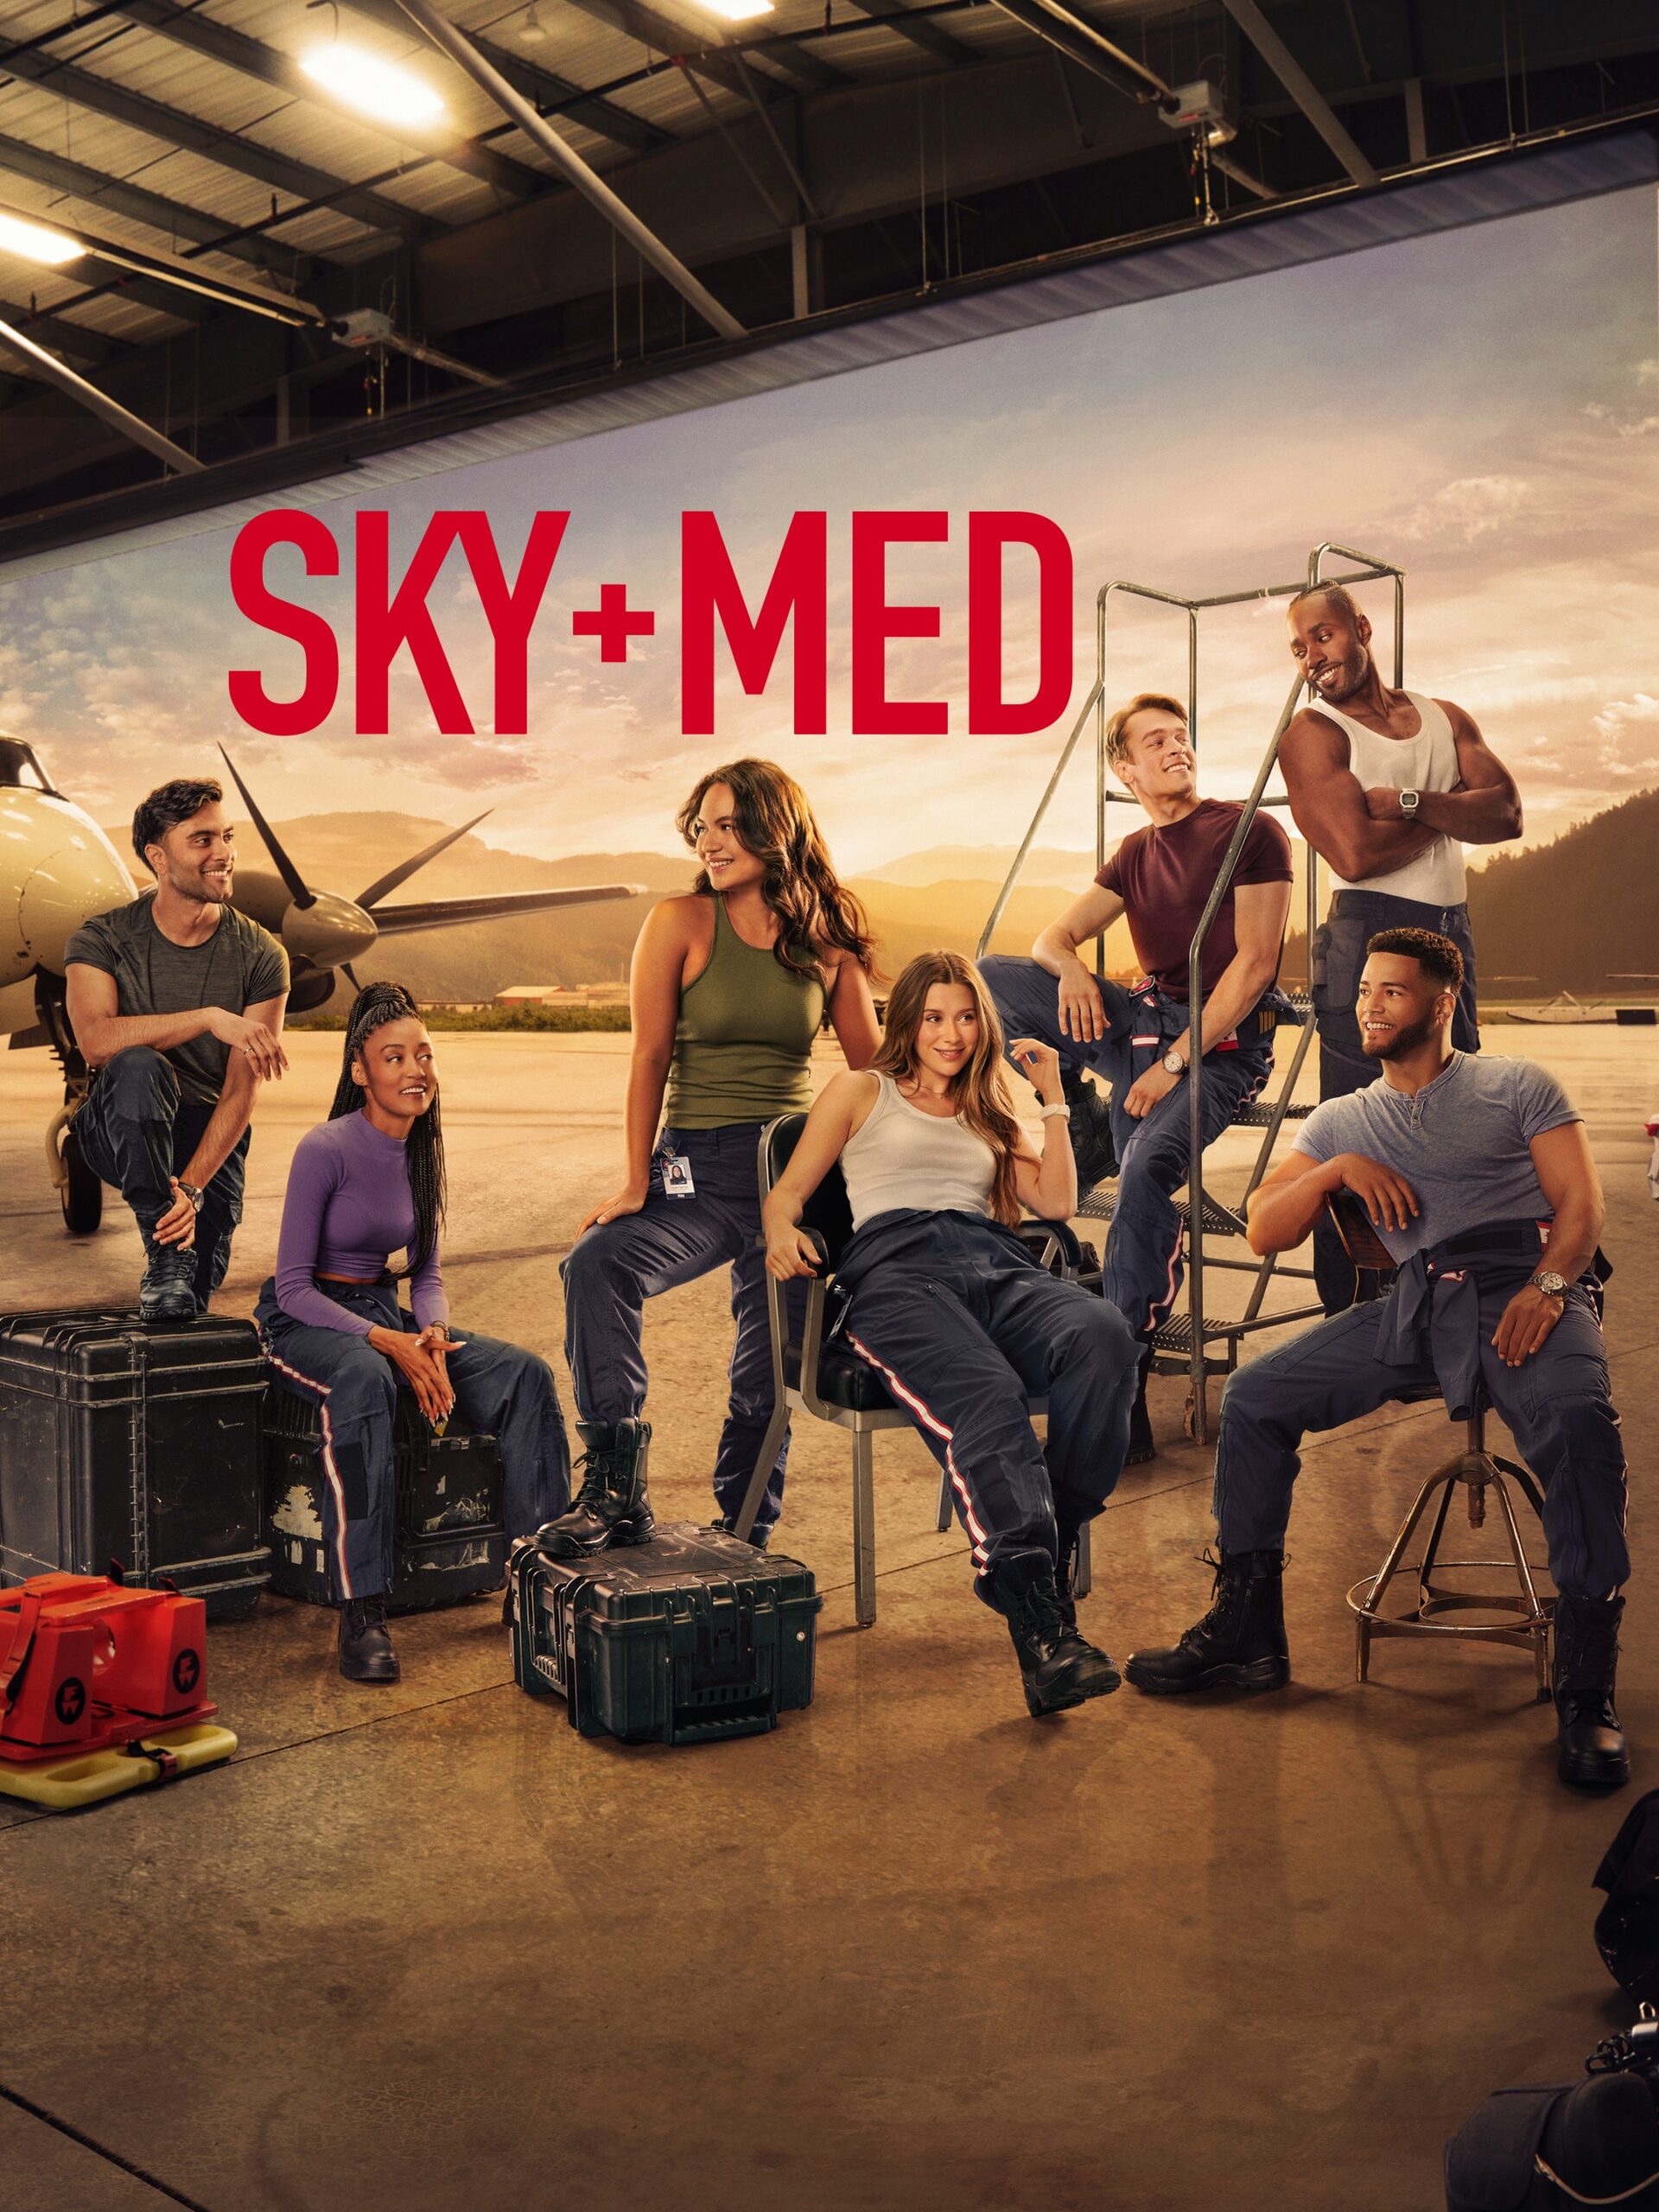 Paramount+ Reveals Official Trailer and Premiere Date for "SkyMed" Season Two